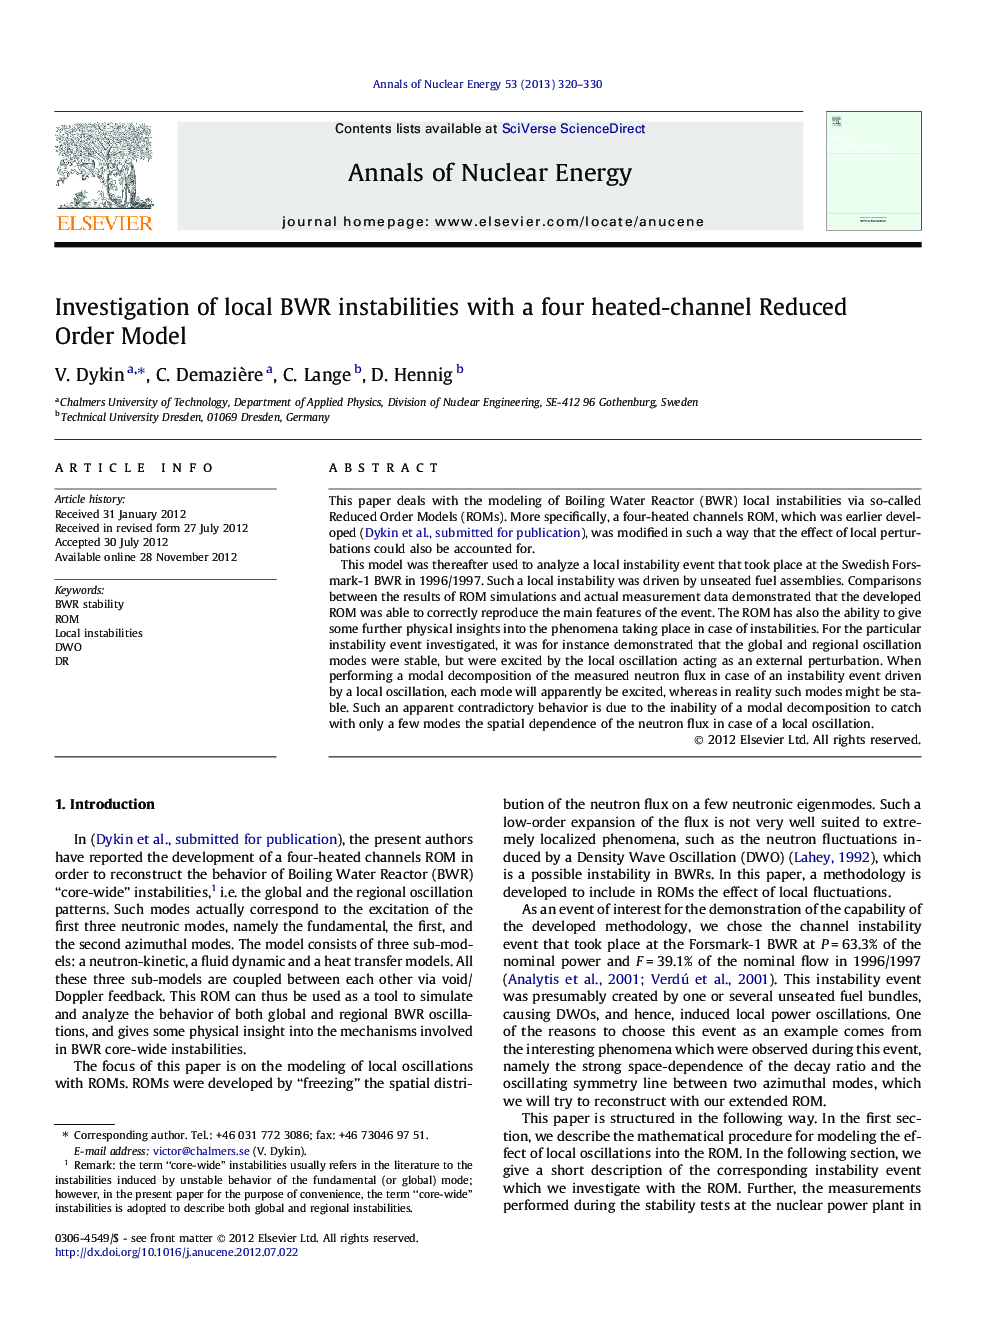 Investigation of local BWR instabilities with a four heated-channel Reduced Order Model